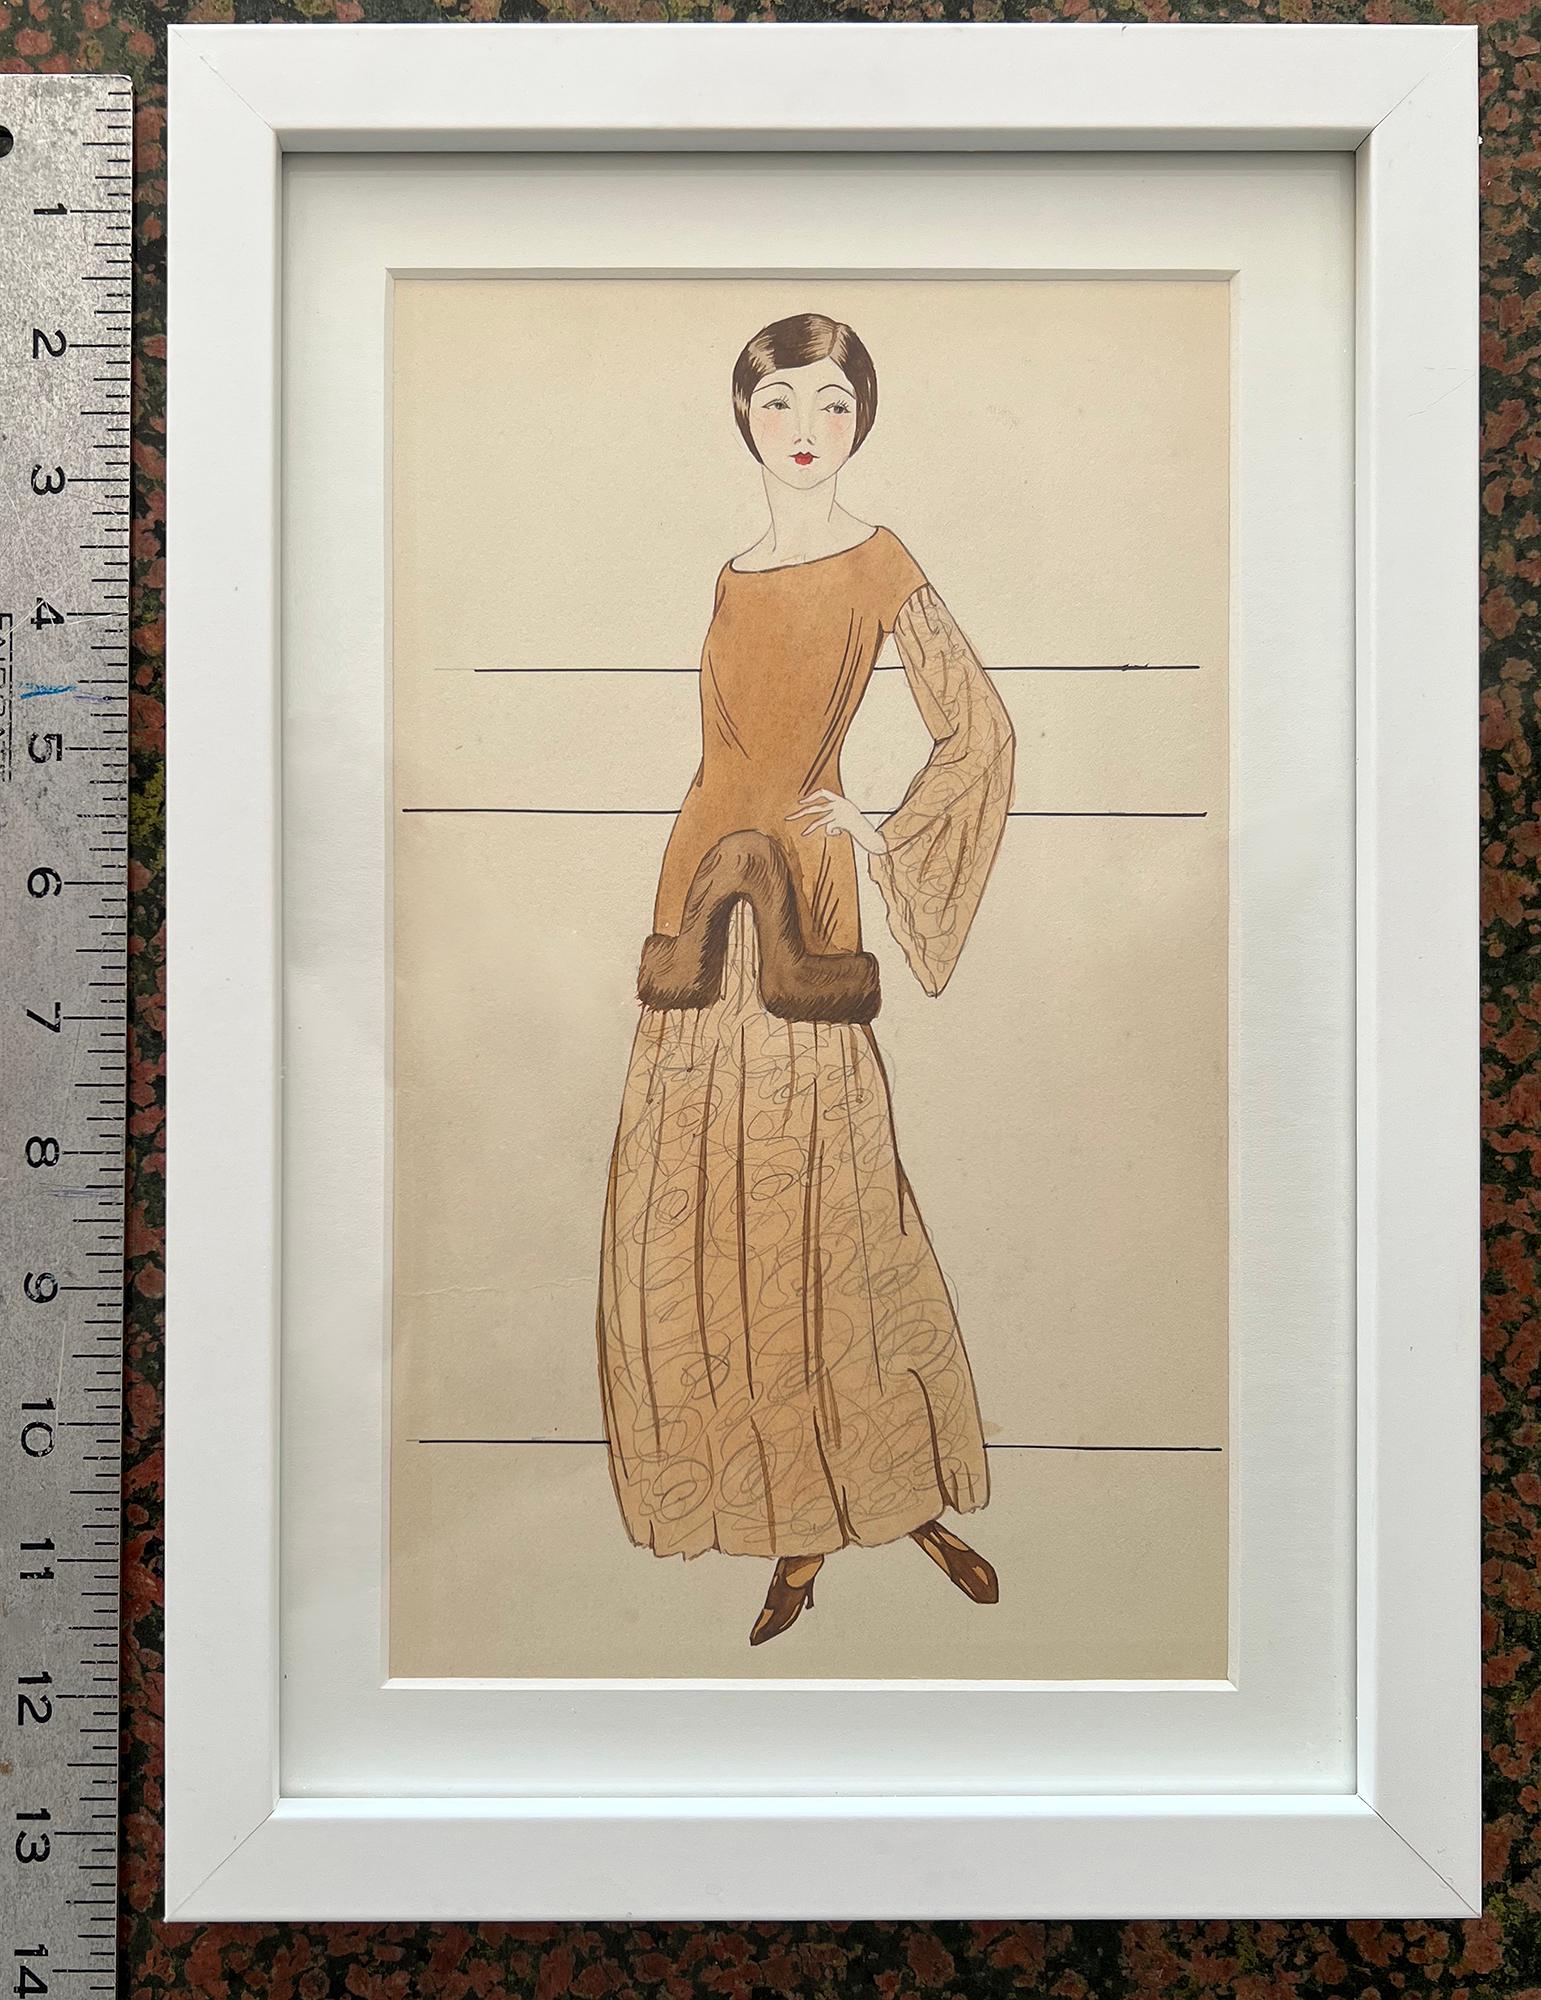 Original Vintage 1920's Ink and Watercolor Fashion Illustration by listed New England artist Harriette (Nutting) Cooper (1901 - 2002). 
The illustration depicts a lovely young flapper woman with a 1920s-accurate era straight bob hairstyle, high